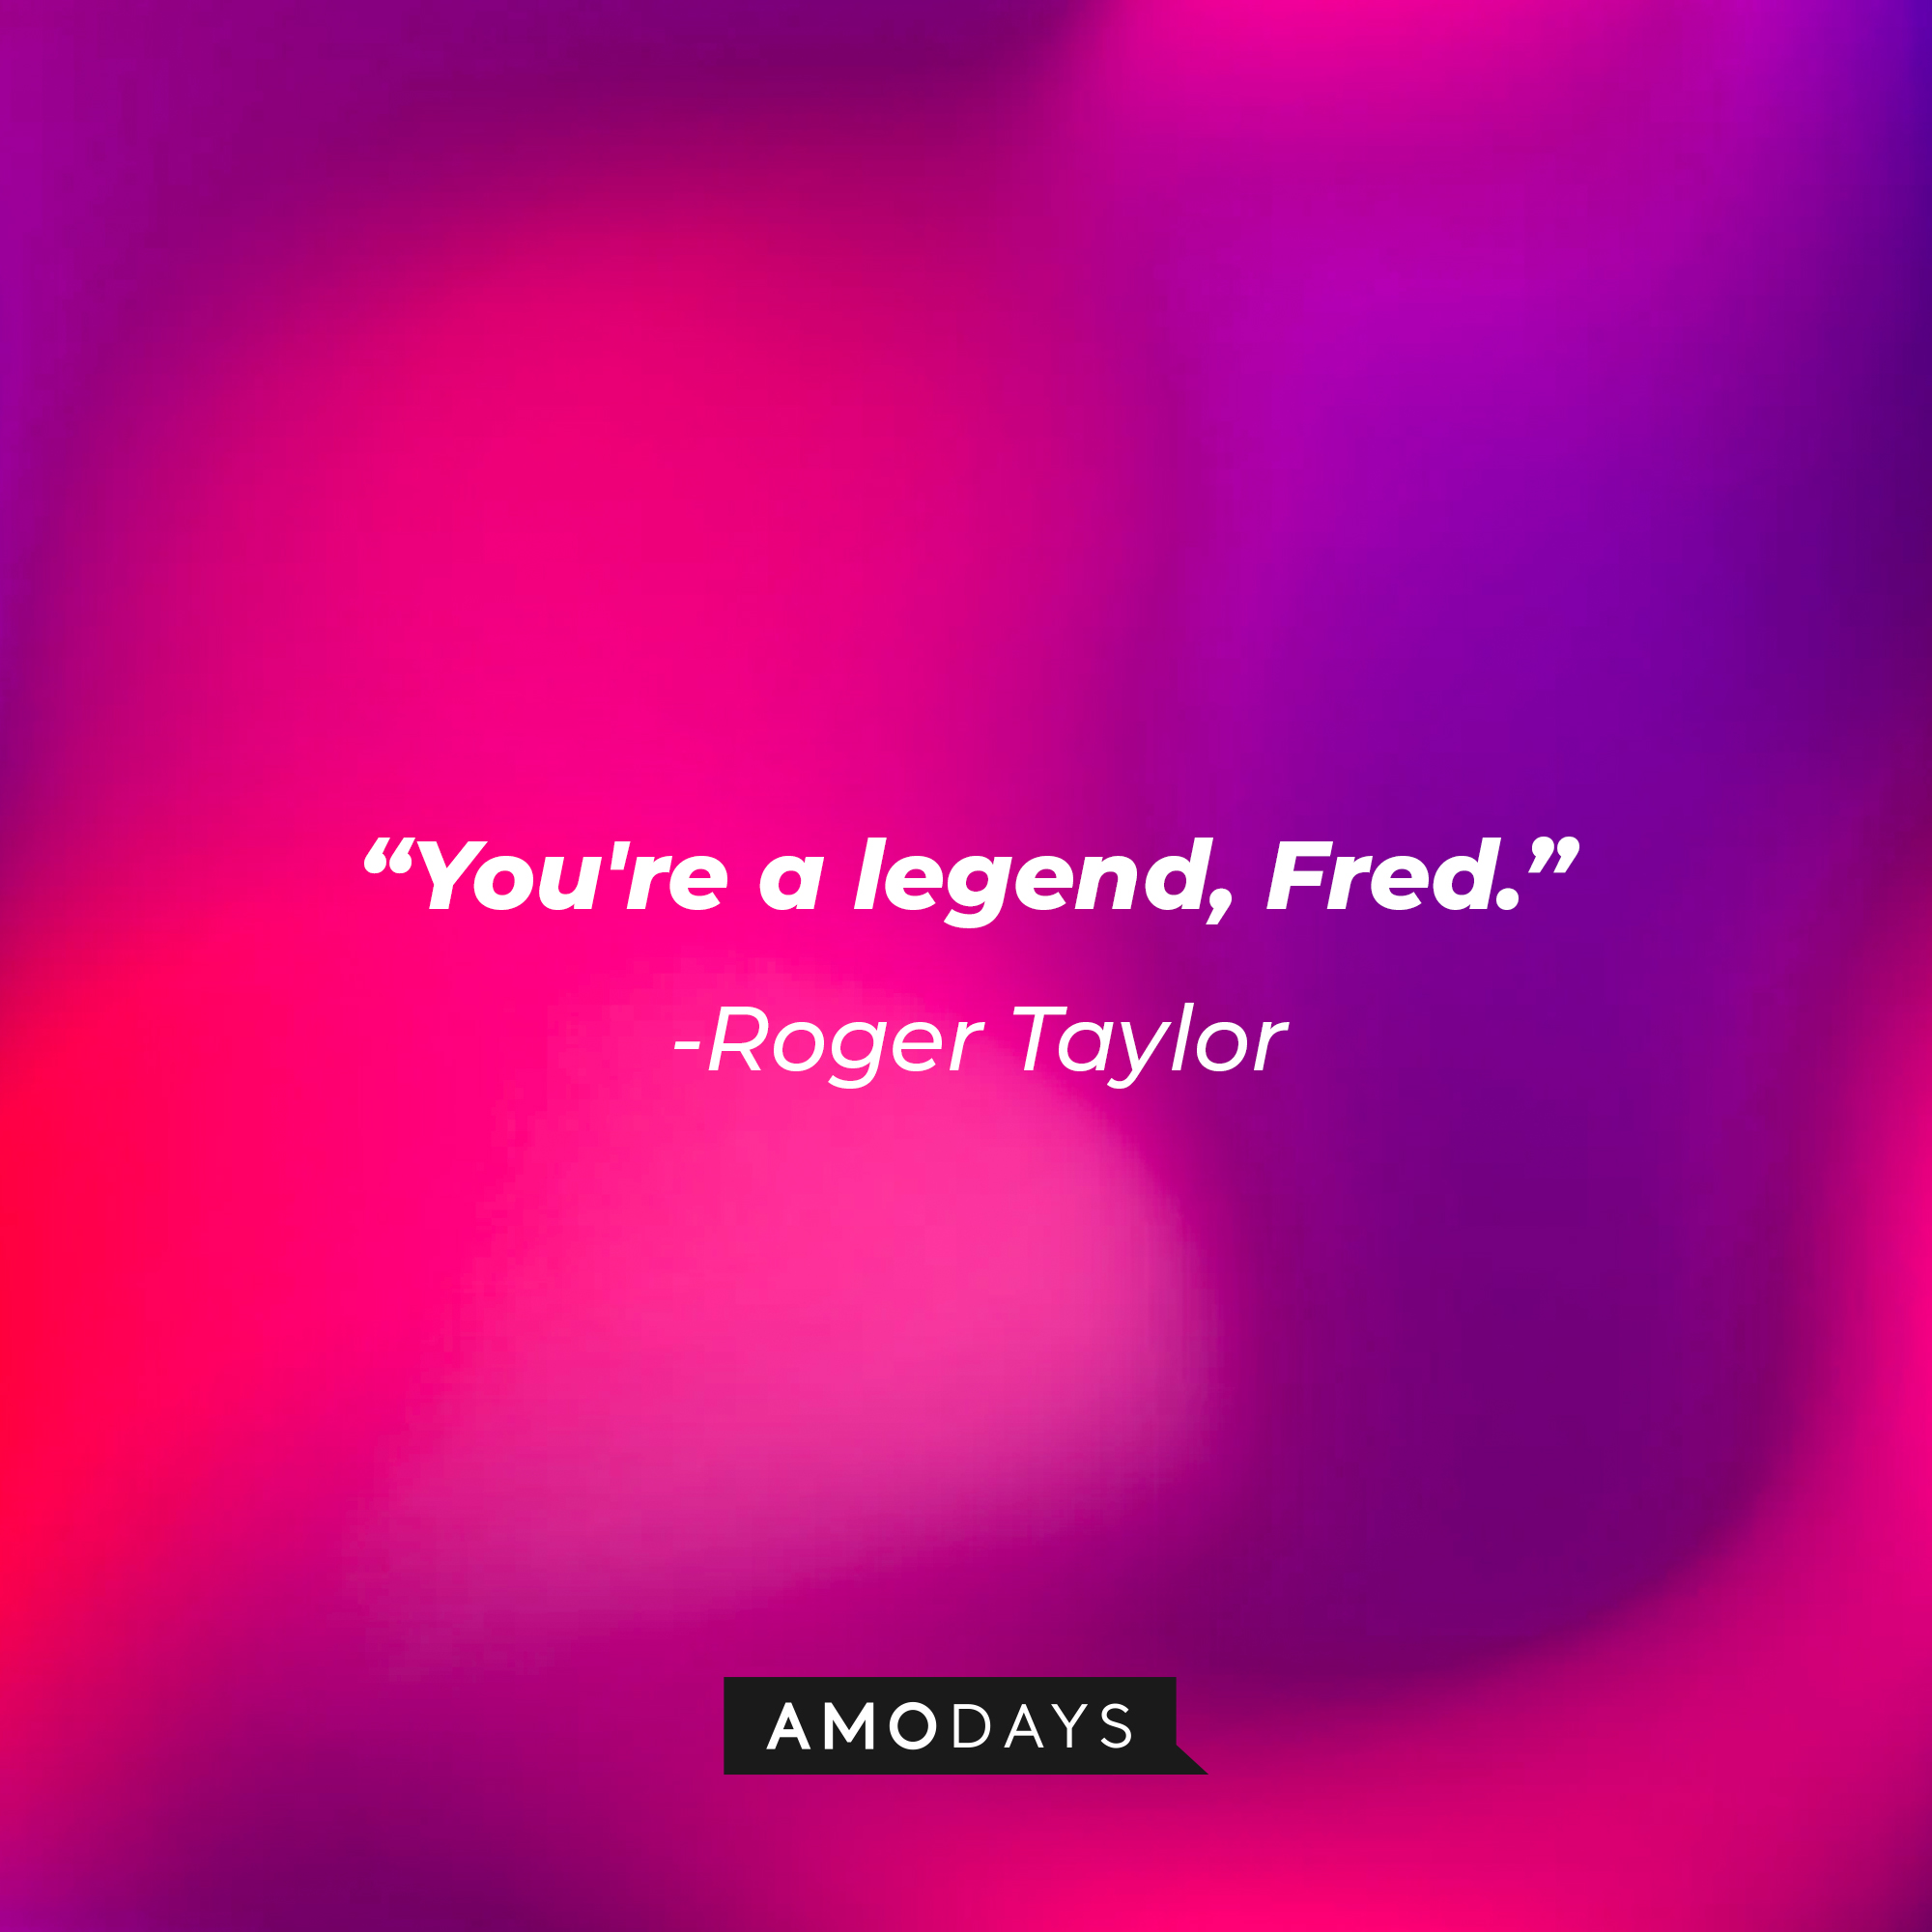 Roger Taylor's quote: "You're a legend, Fred." | Image: Amodays